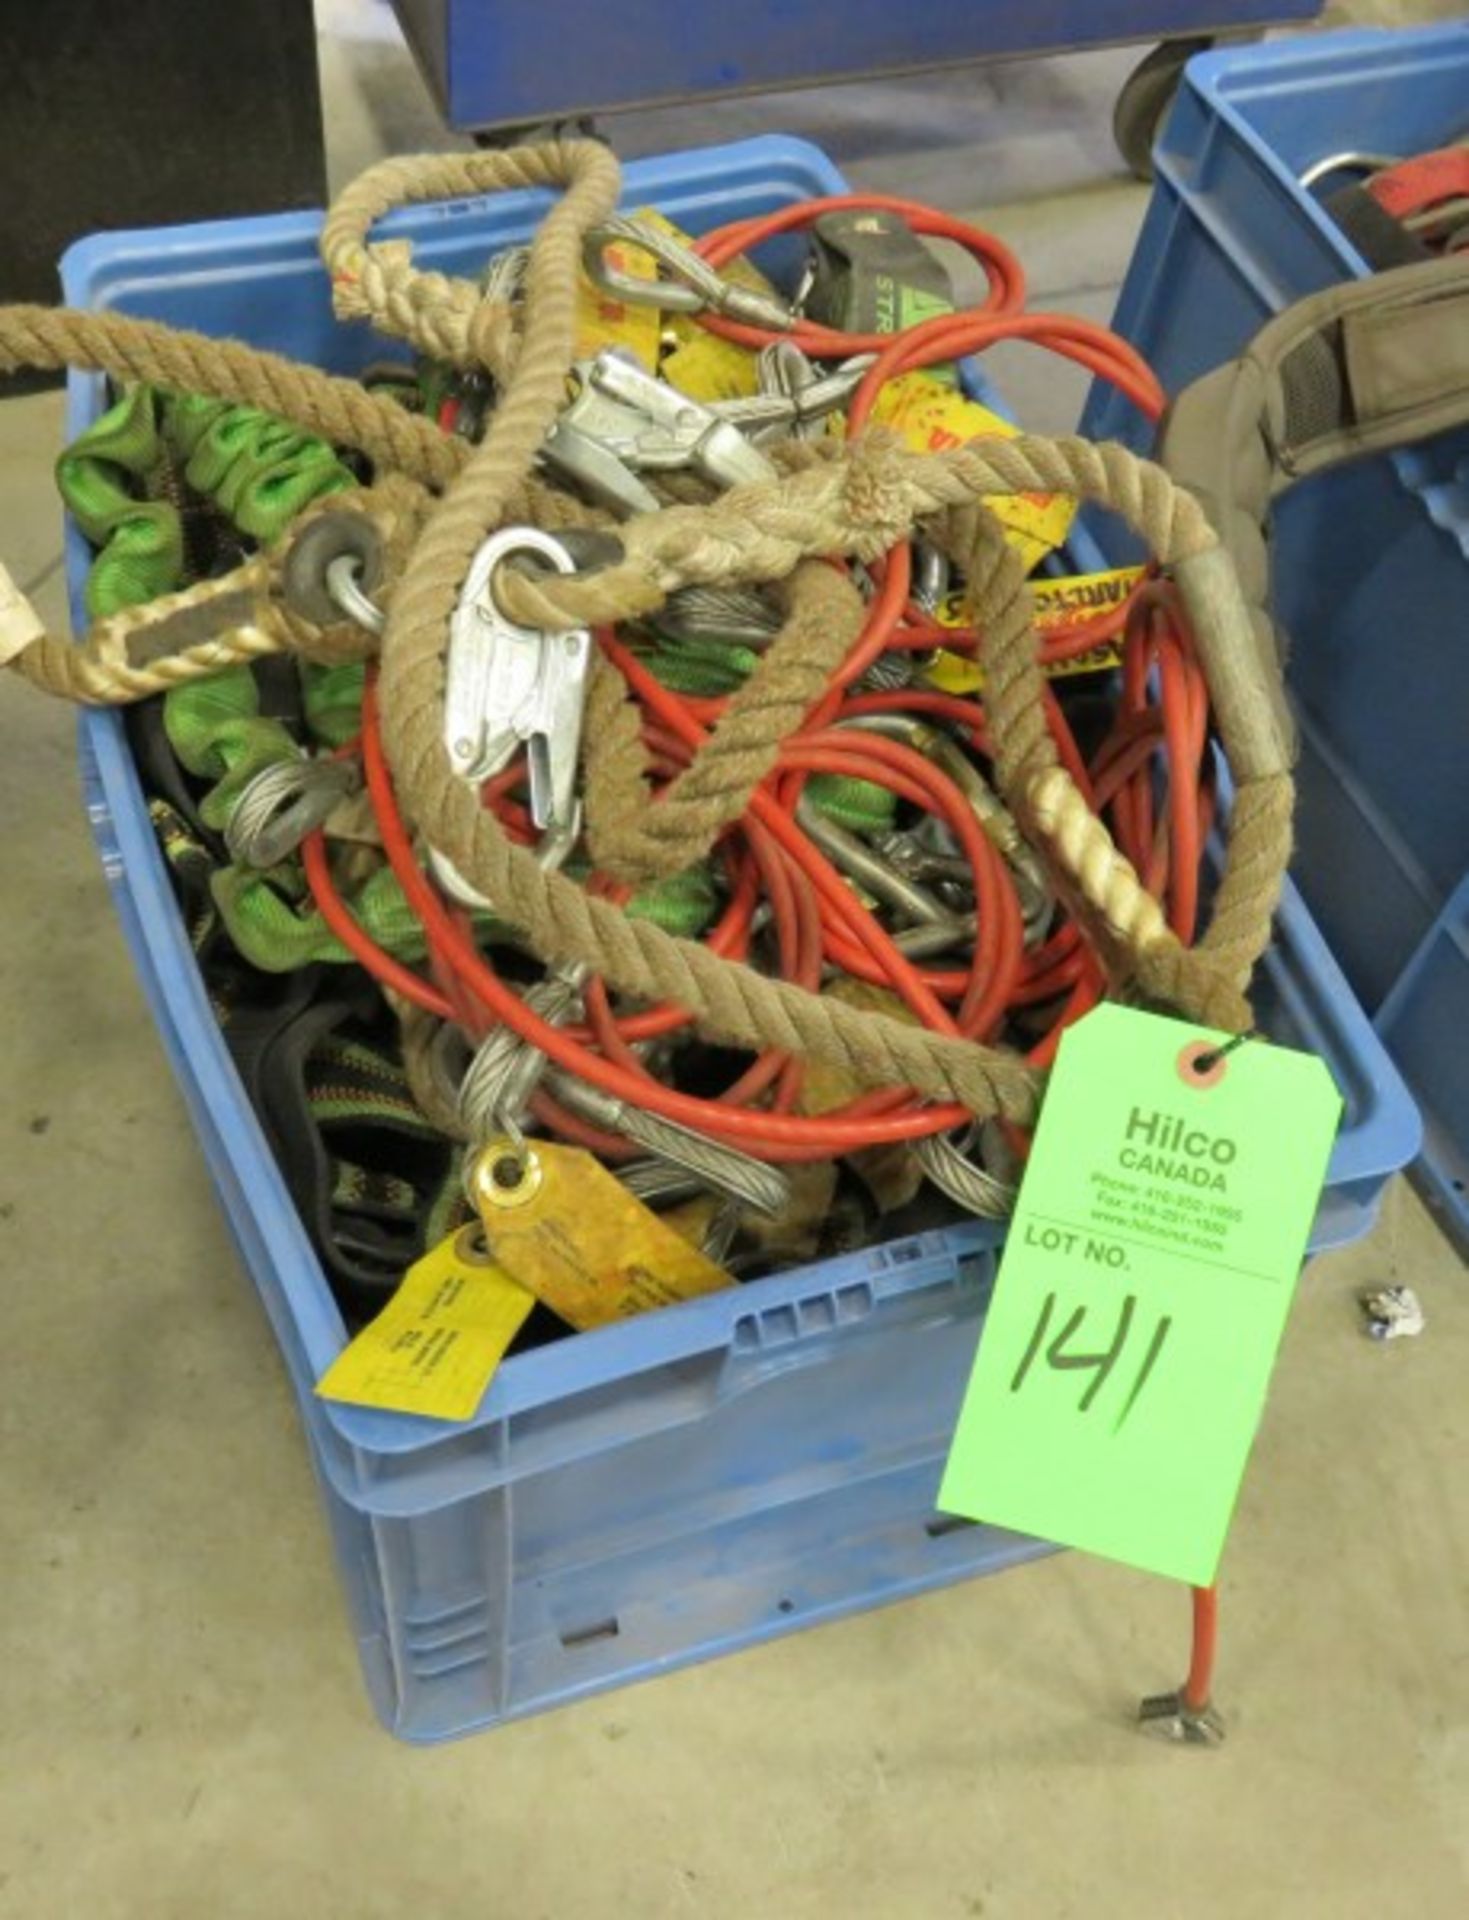 BOX OF ASSORTED SAFETY HARNESSES